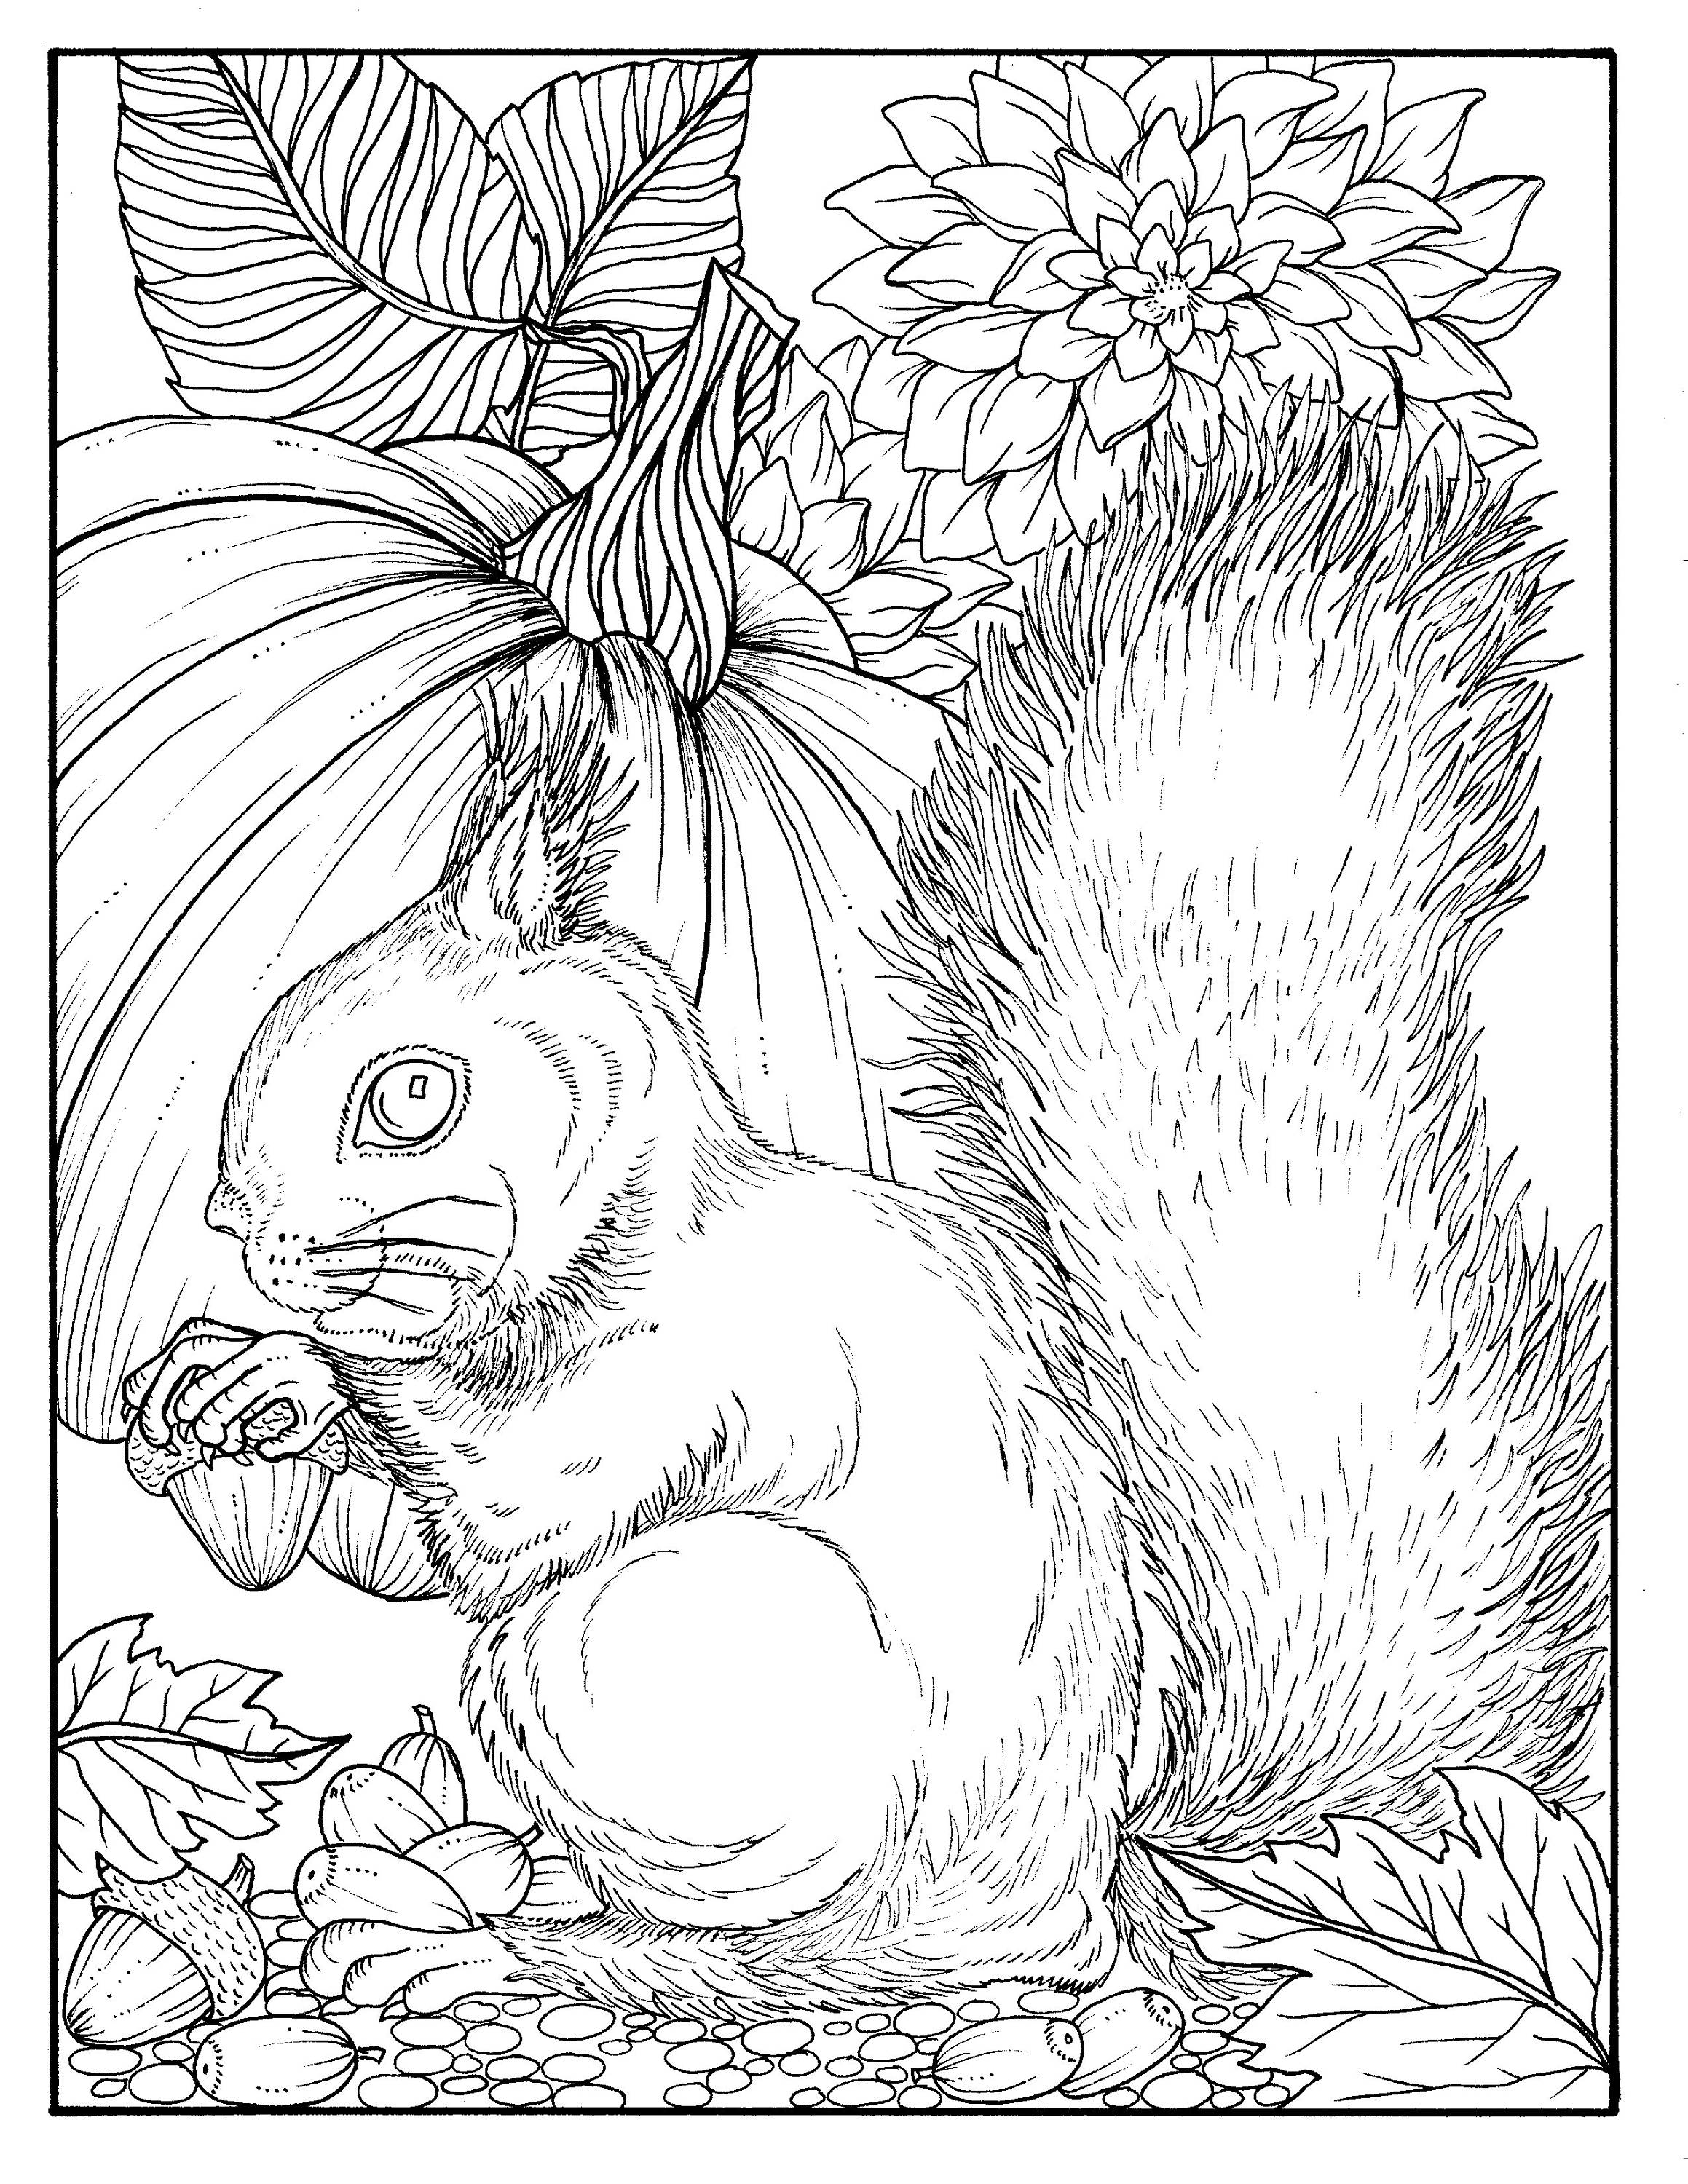 Fall squirrel digital coloring page digi stamp thanksgiving adult coloring stamp pumpkin autumn leaves color page download now